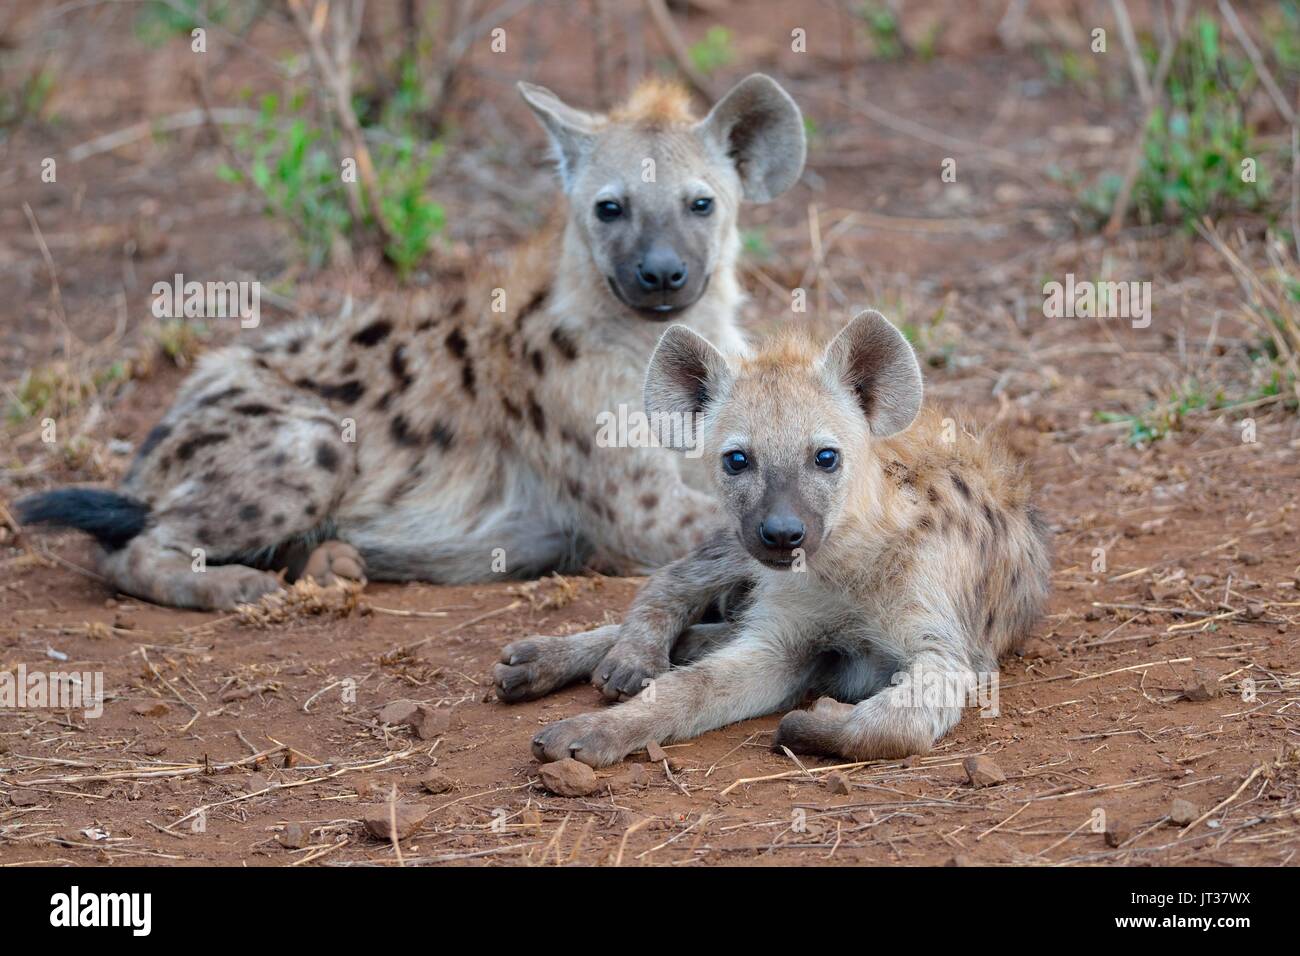 Spotted hyenas or Laughing hyenas (Crocuta crocuta), lying, facing camera, Kruger National Park, South Africa, Africa Stock Photo